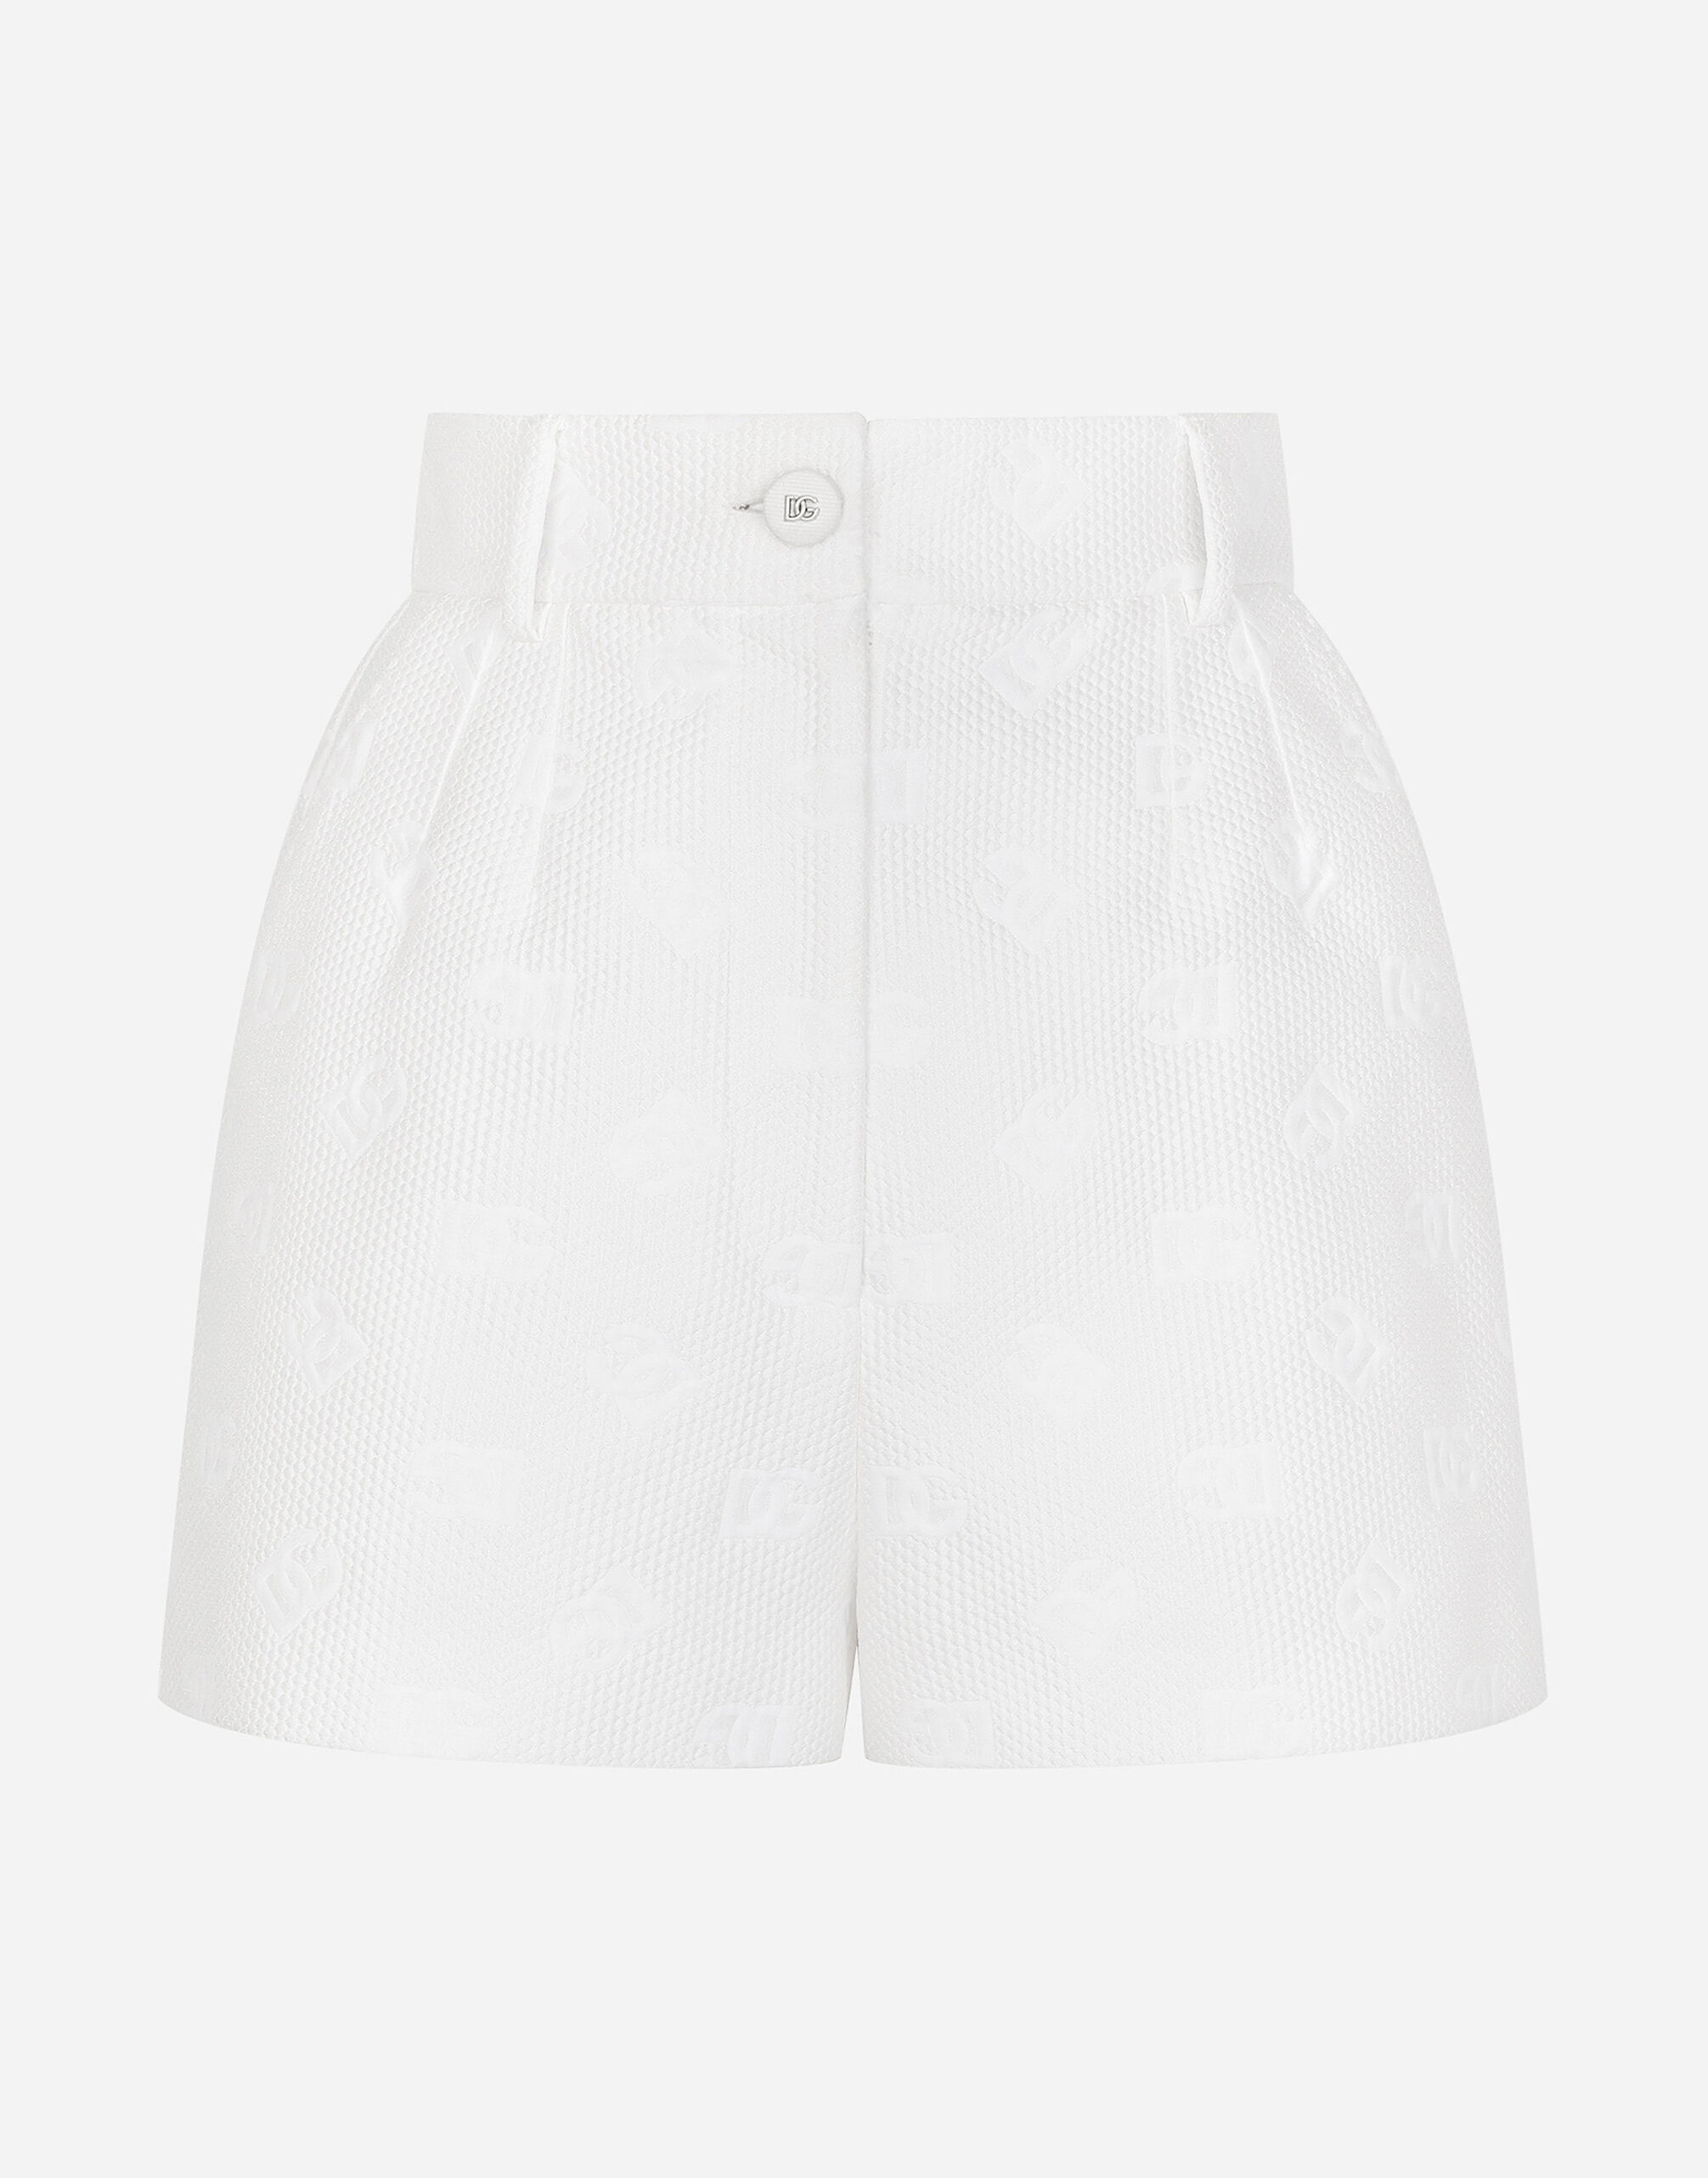 Jacquard shorts with all-over DG logo - 1